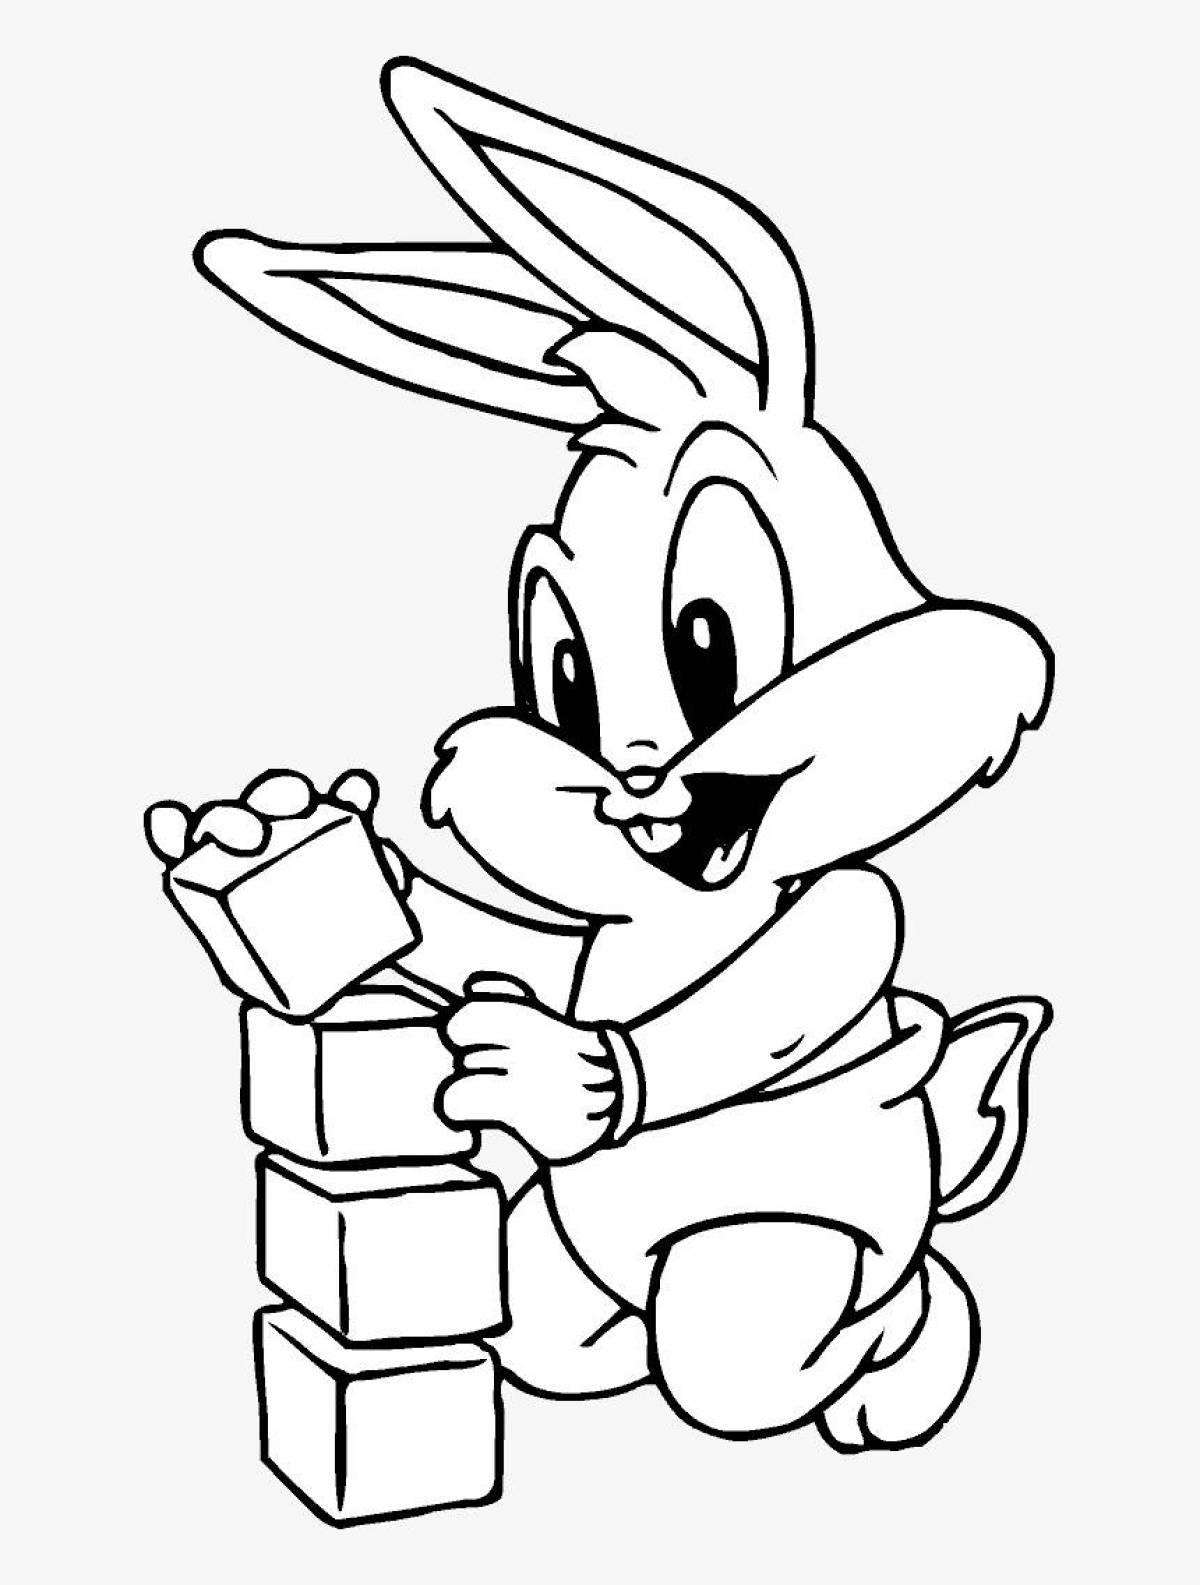 Coloring book live hare for children 3-4 years old